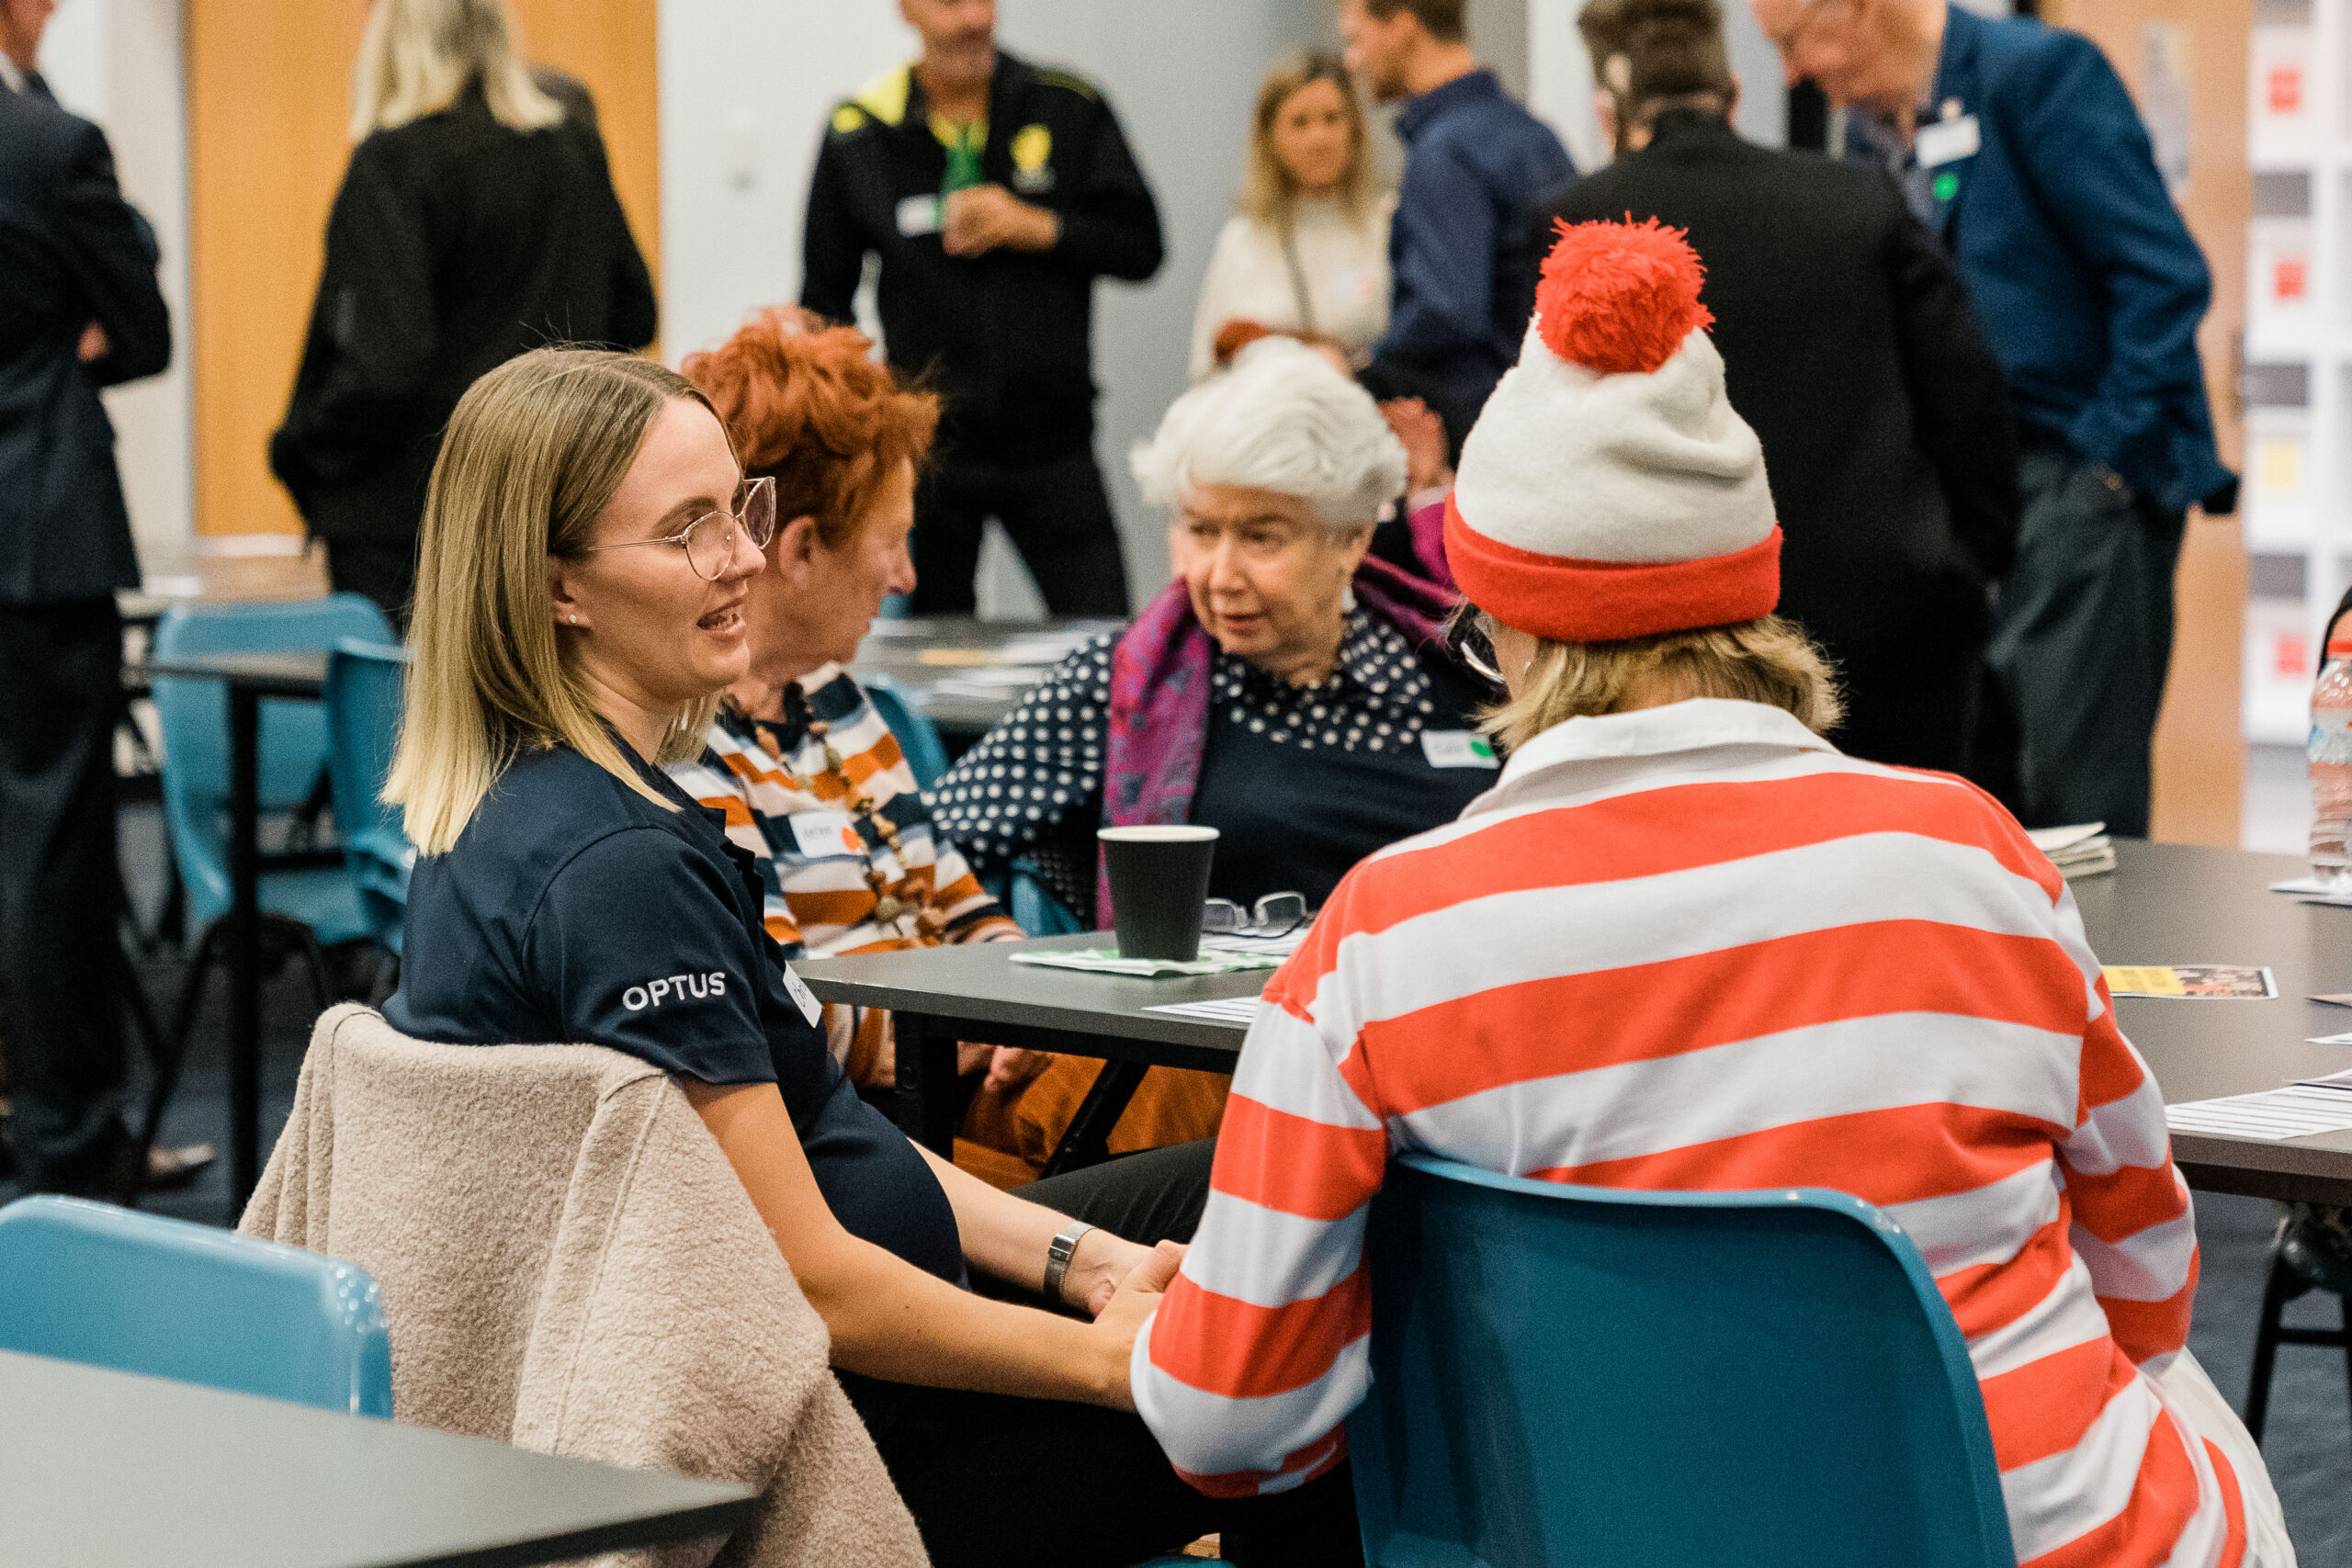 Group of women sitting around a table chatting, one dressed as Where's Wally